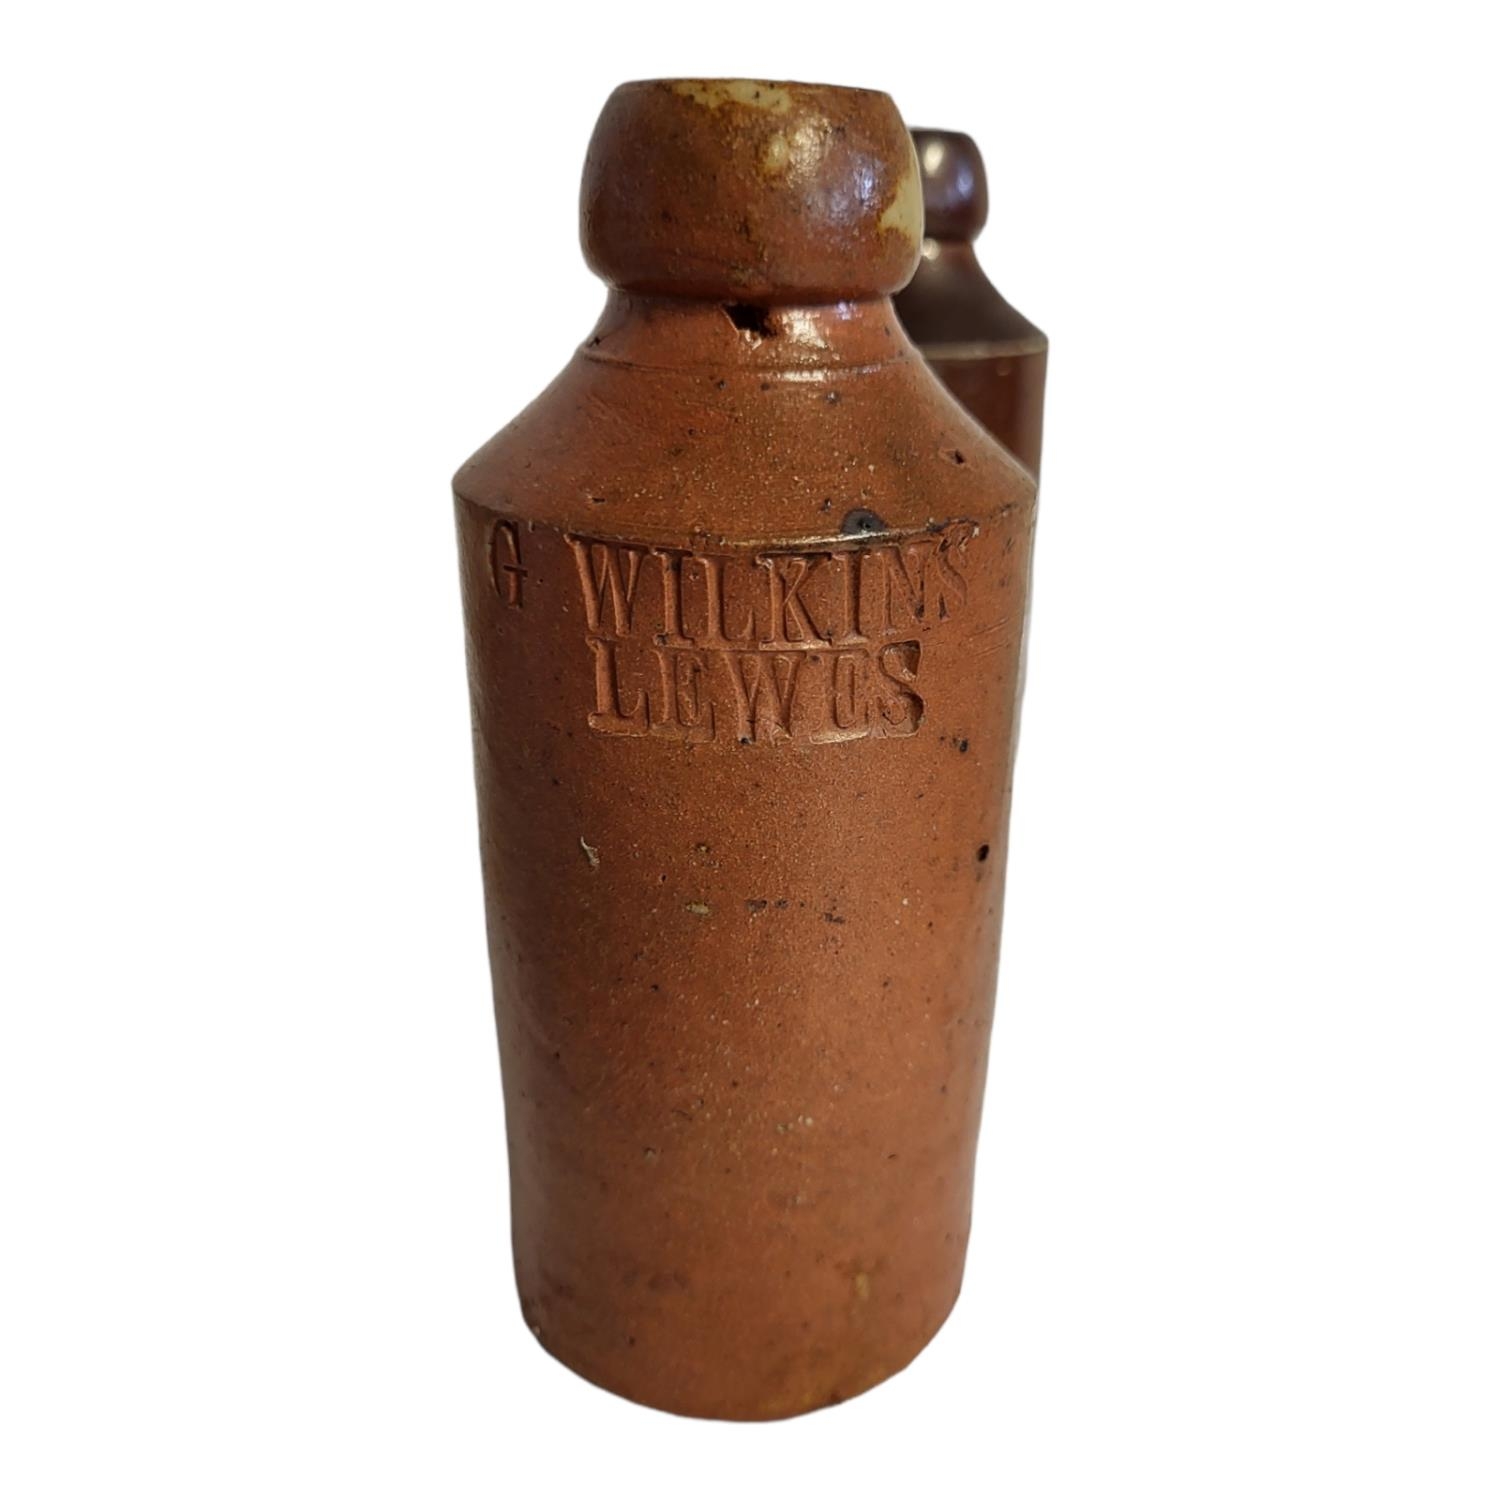 A 19TH CENTURY ENGLISH SALT GLAZED STONEWARE BOTTLES Various Victorian and later stoneware - Image 4 of 8